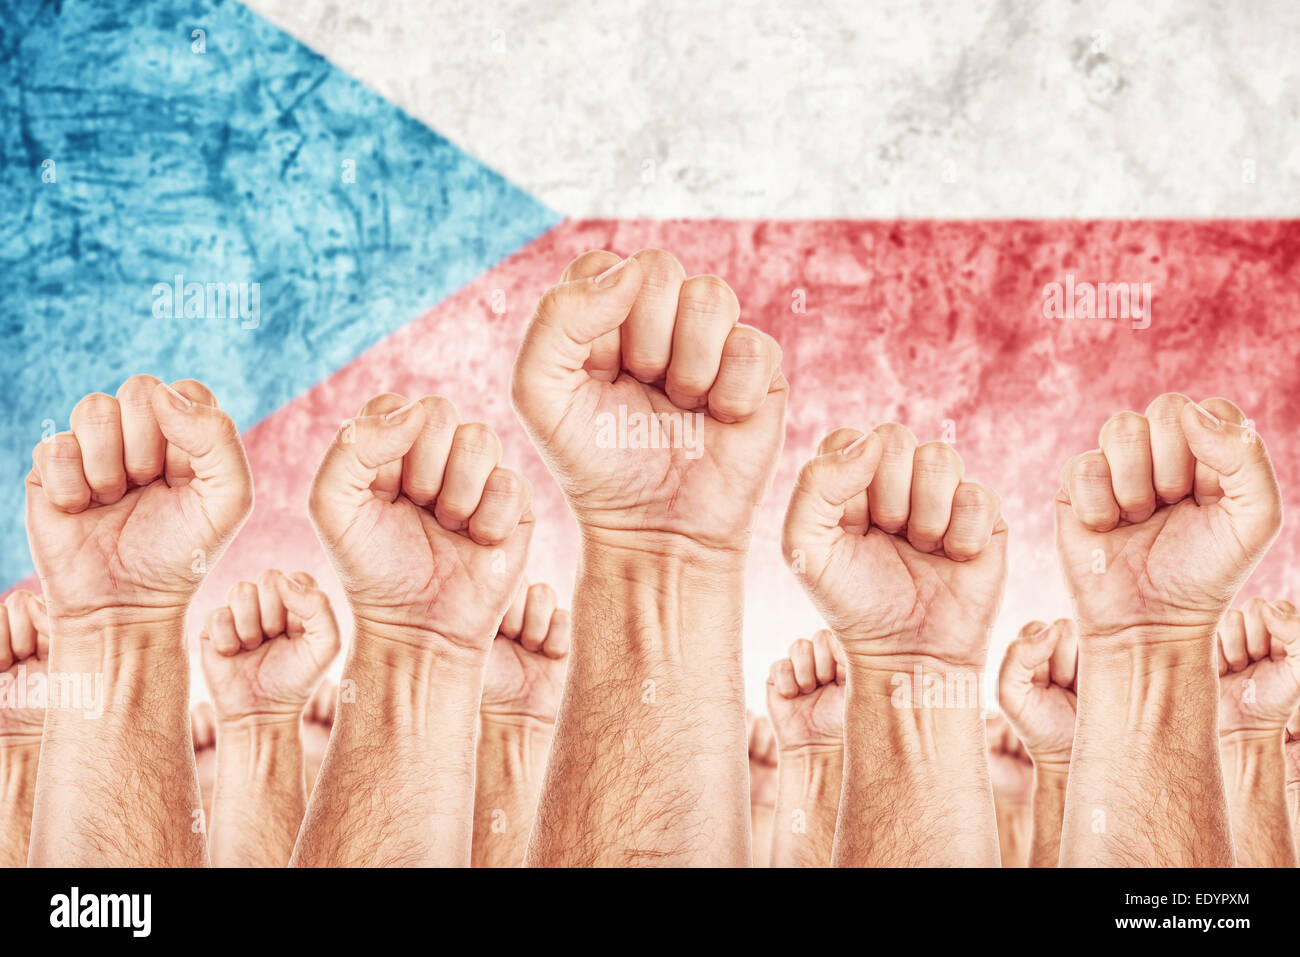 Czech Labor movement, workers union strike concept with male fists raised in the air fighting for their rights Stock Photo